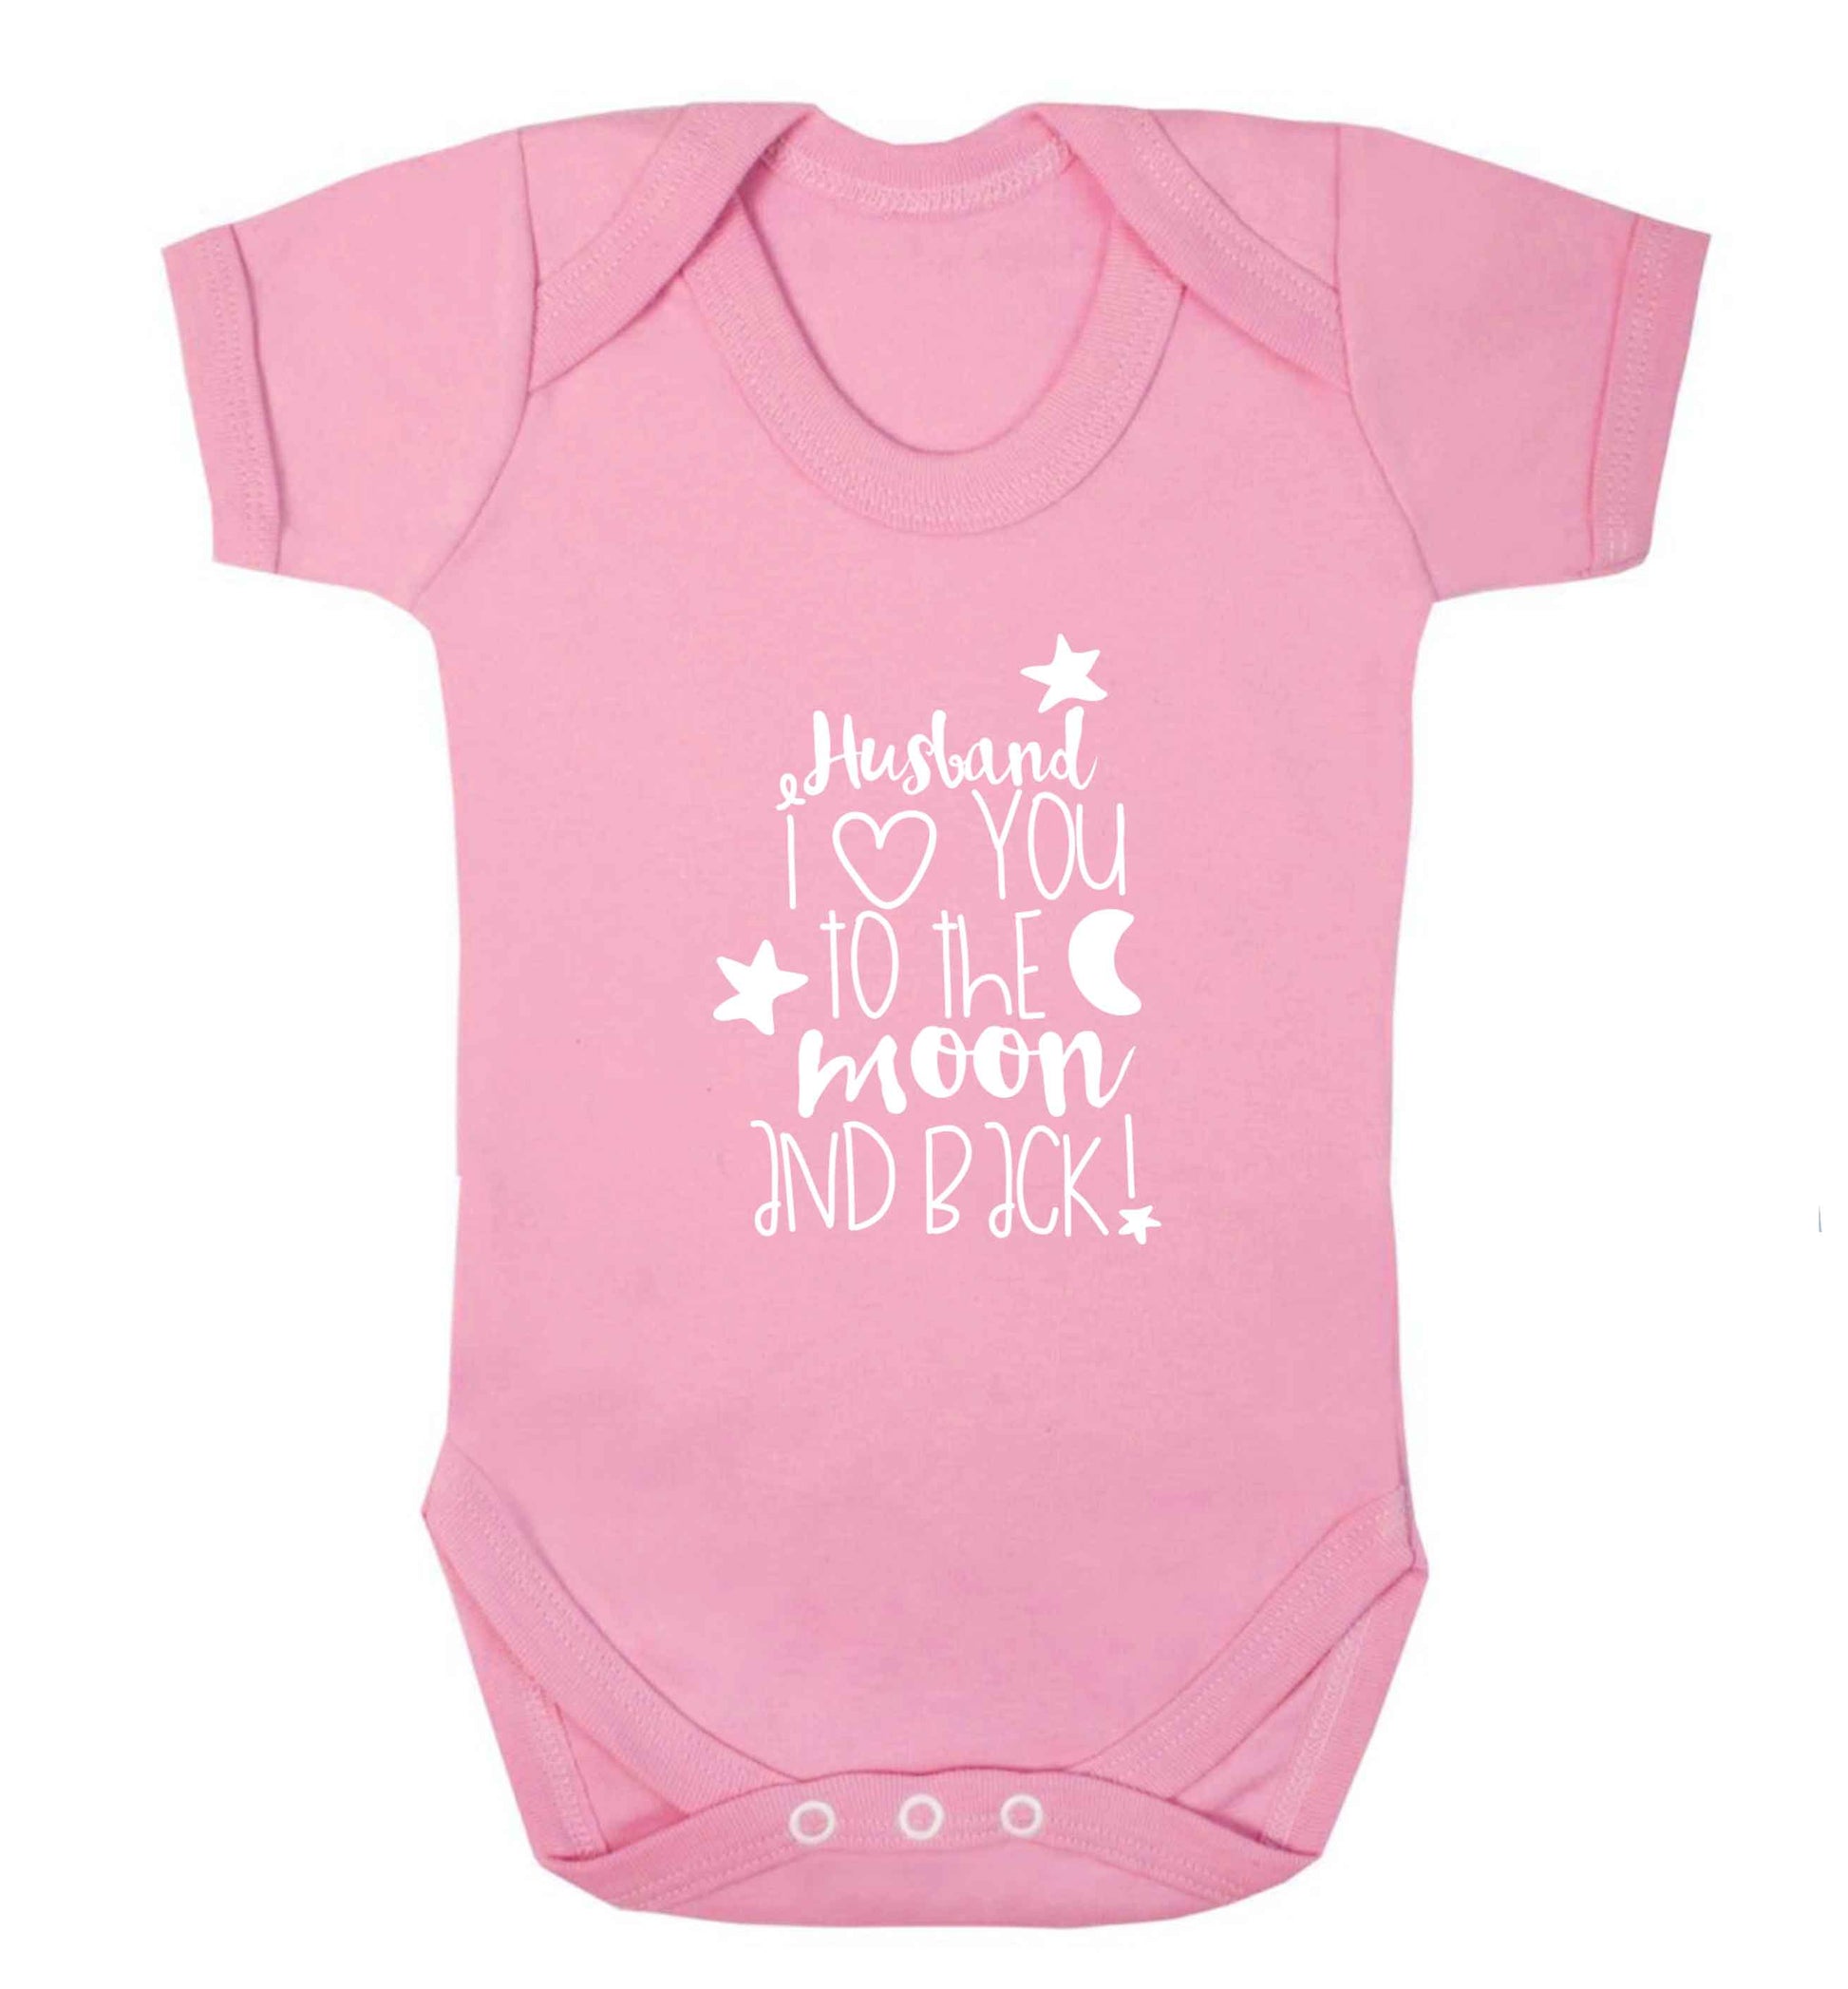 Husband I love you to the moon and back baby vest pale pink 18-24 months